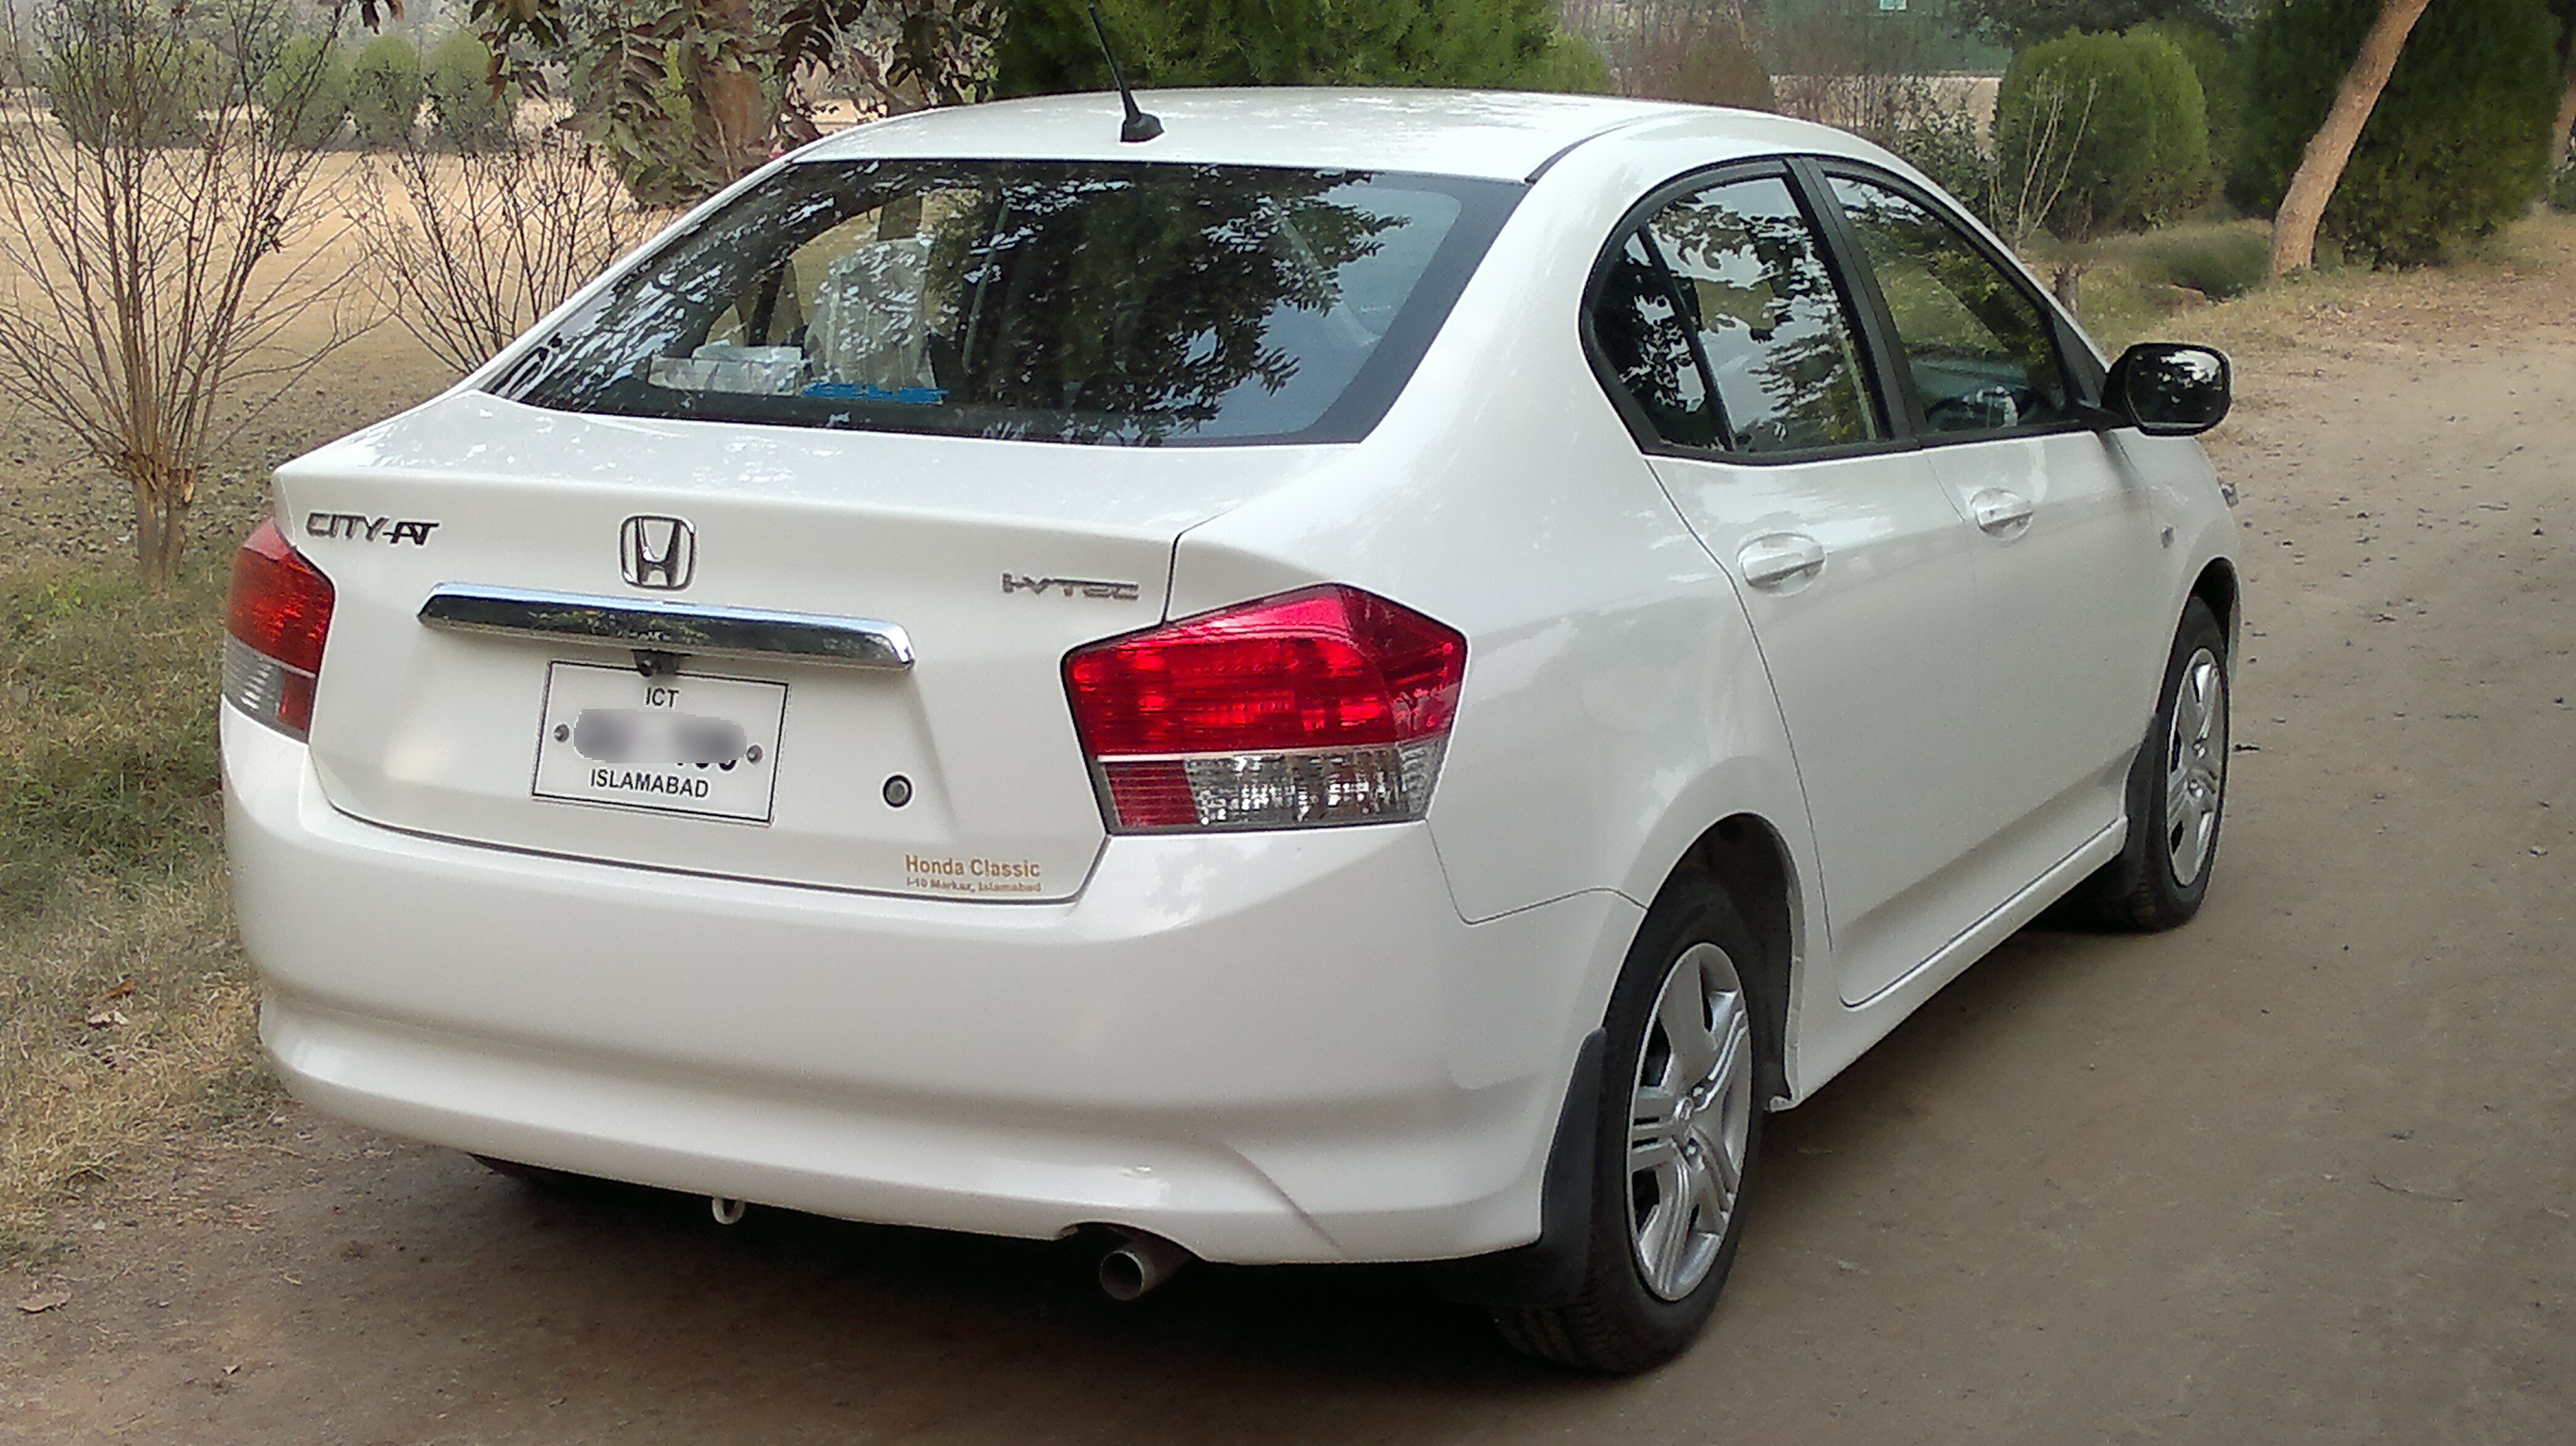 Honda City 2010 Review, Amazing Pictures and Images – Look at the car